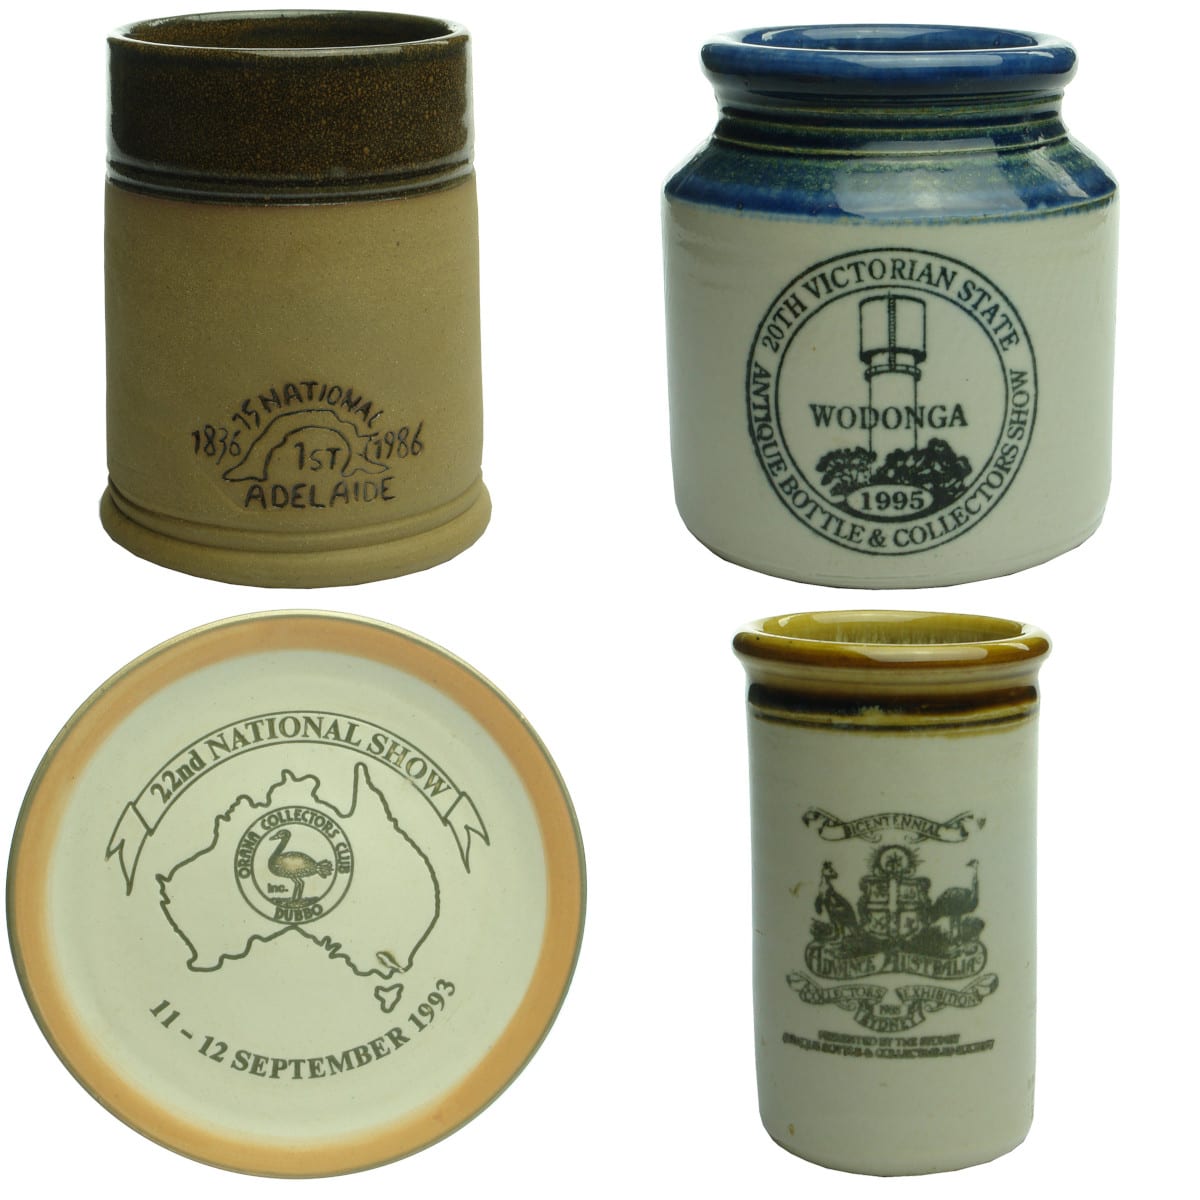 4 Pottery Show Prizes. 15th National Adelaide Mug; 20th Victorian State Show Wodonga Jar; 22nd National Dubbo Plate; Bicentennial Show Sydney Jar. Alston Park Pottery; Brookfield Pottery; Yarrabar Pottery.